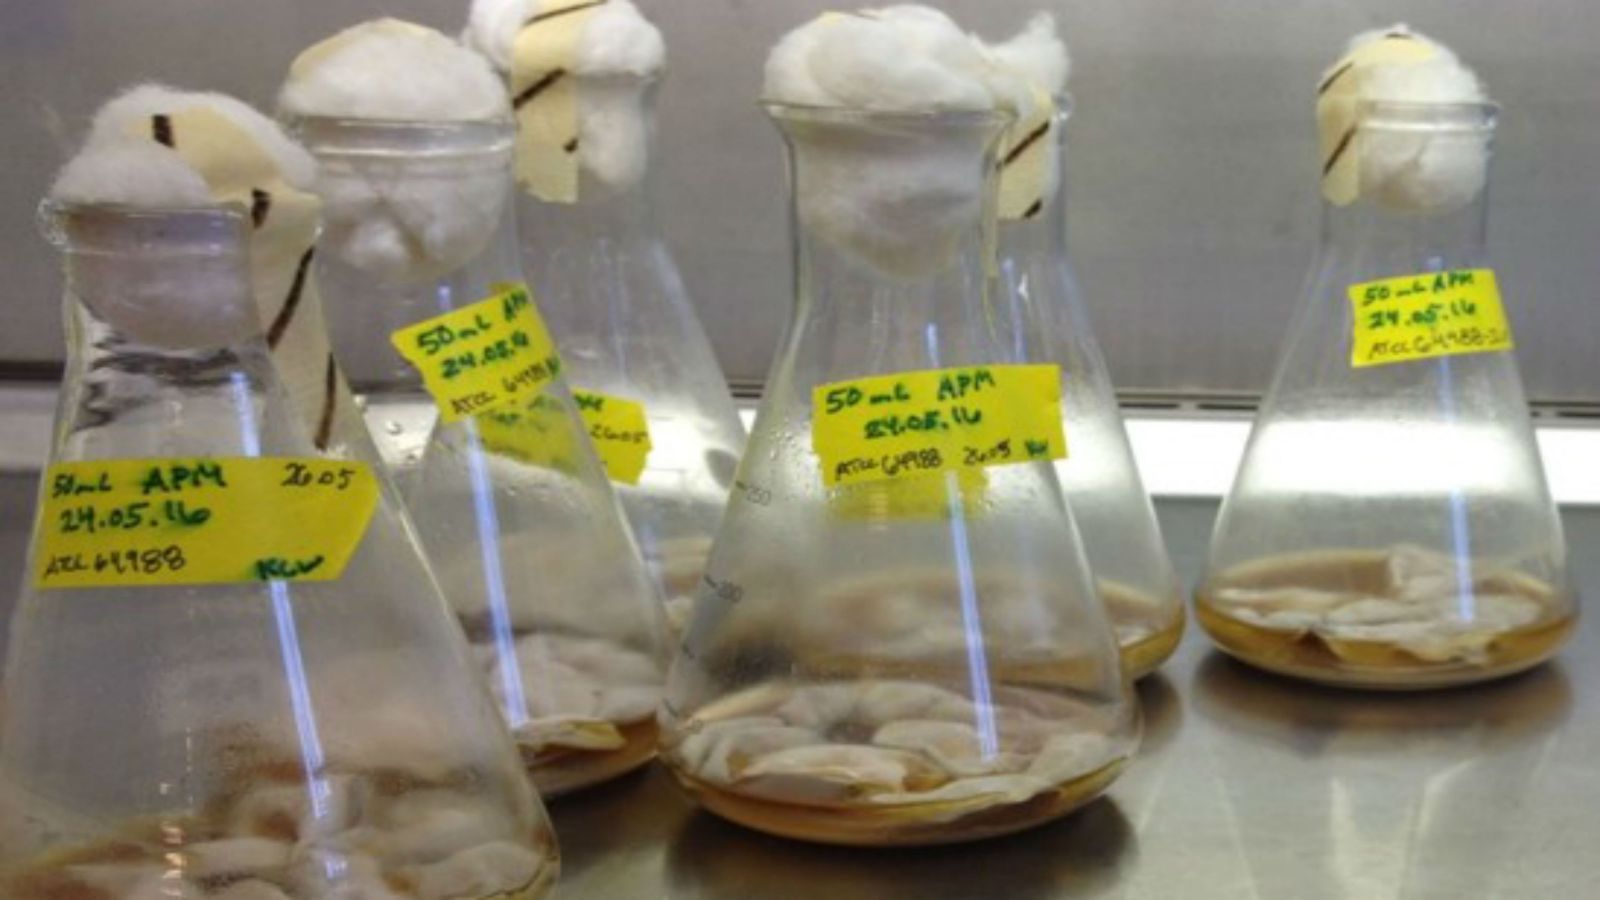 Fungal cultures are grown in sugar water and are ready to harvest.